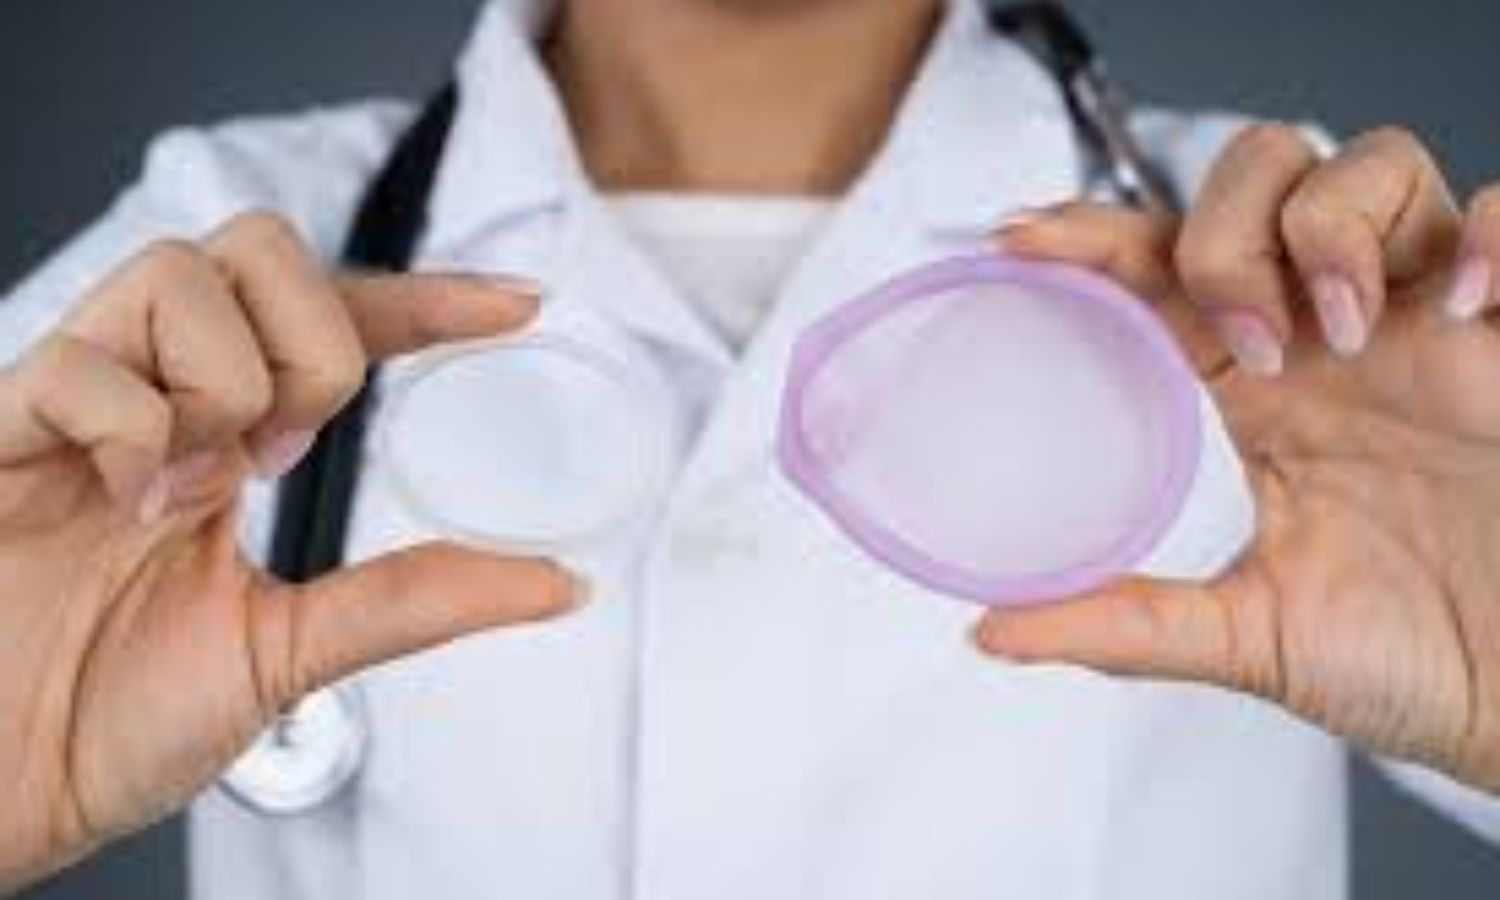 Use of combined contraceptive vaginal rings raises risk for certain STIs, finds study